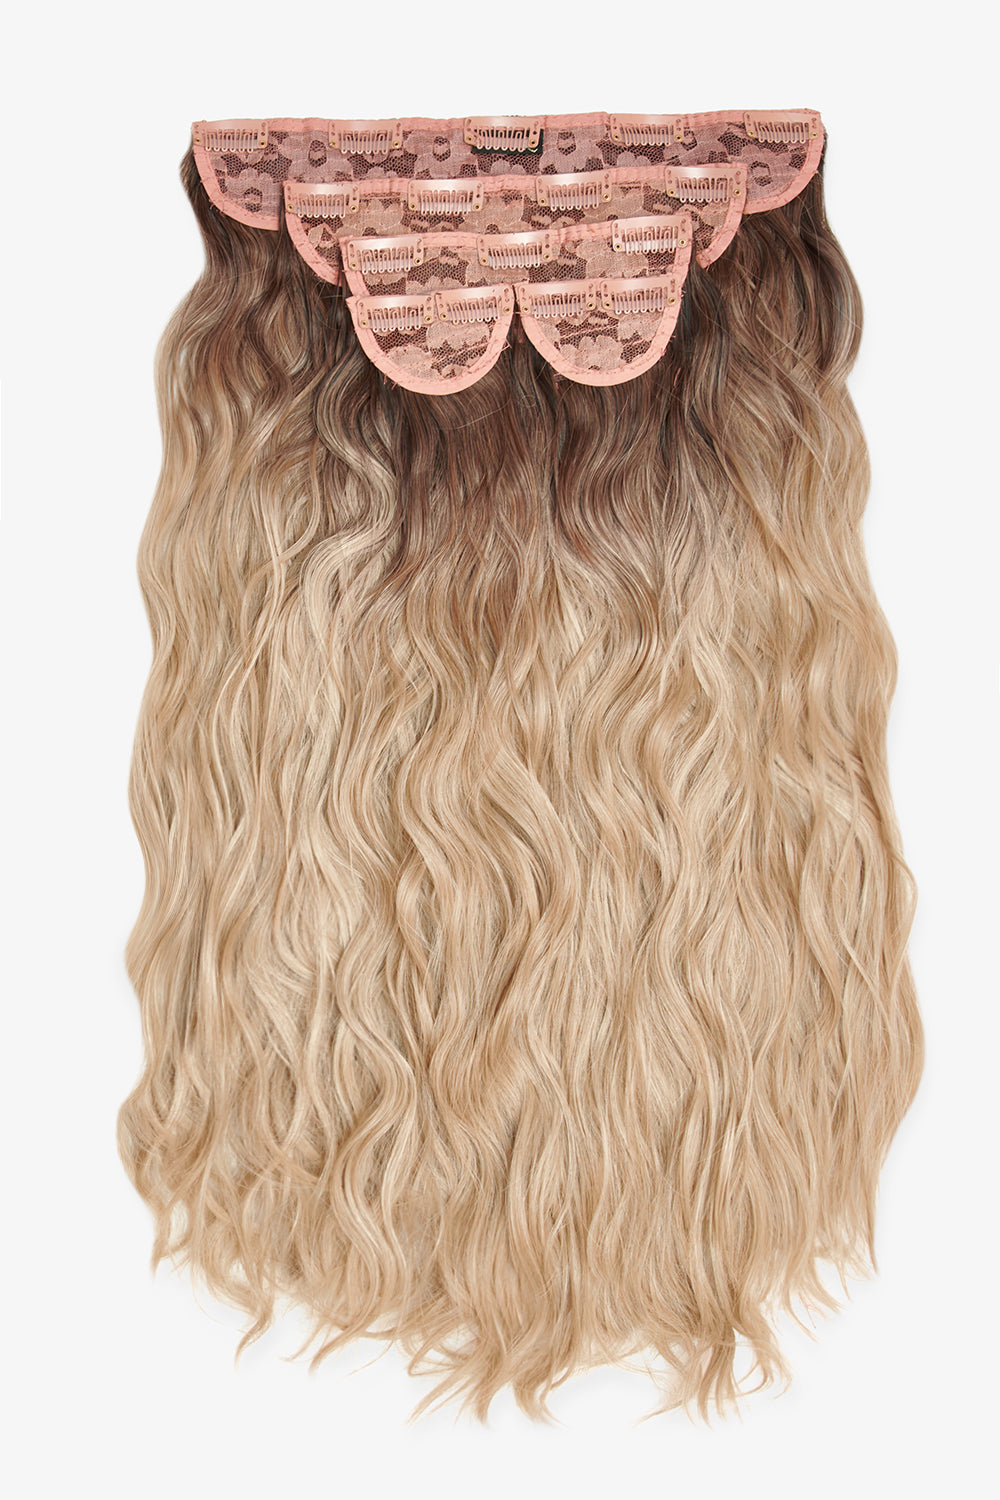 Super Thick 22" 5 Piece Crimped Wavy Clip In Hair Extensions - LullaBellz  - Rooted California Blonde